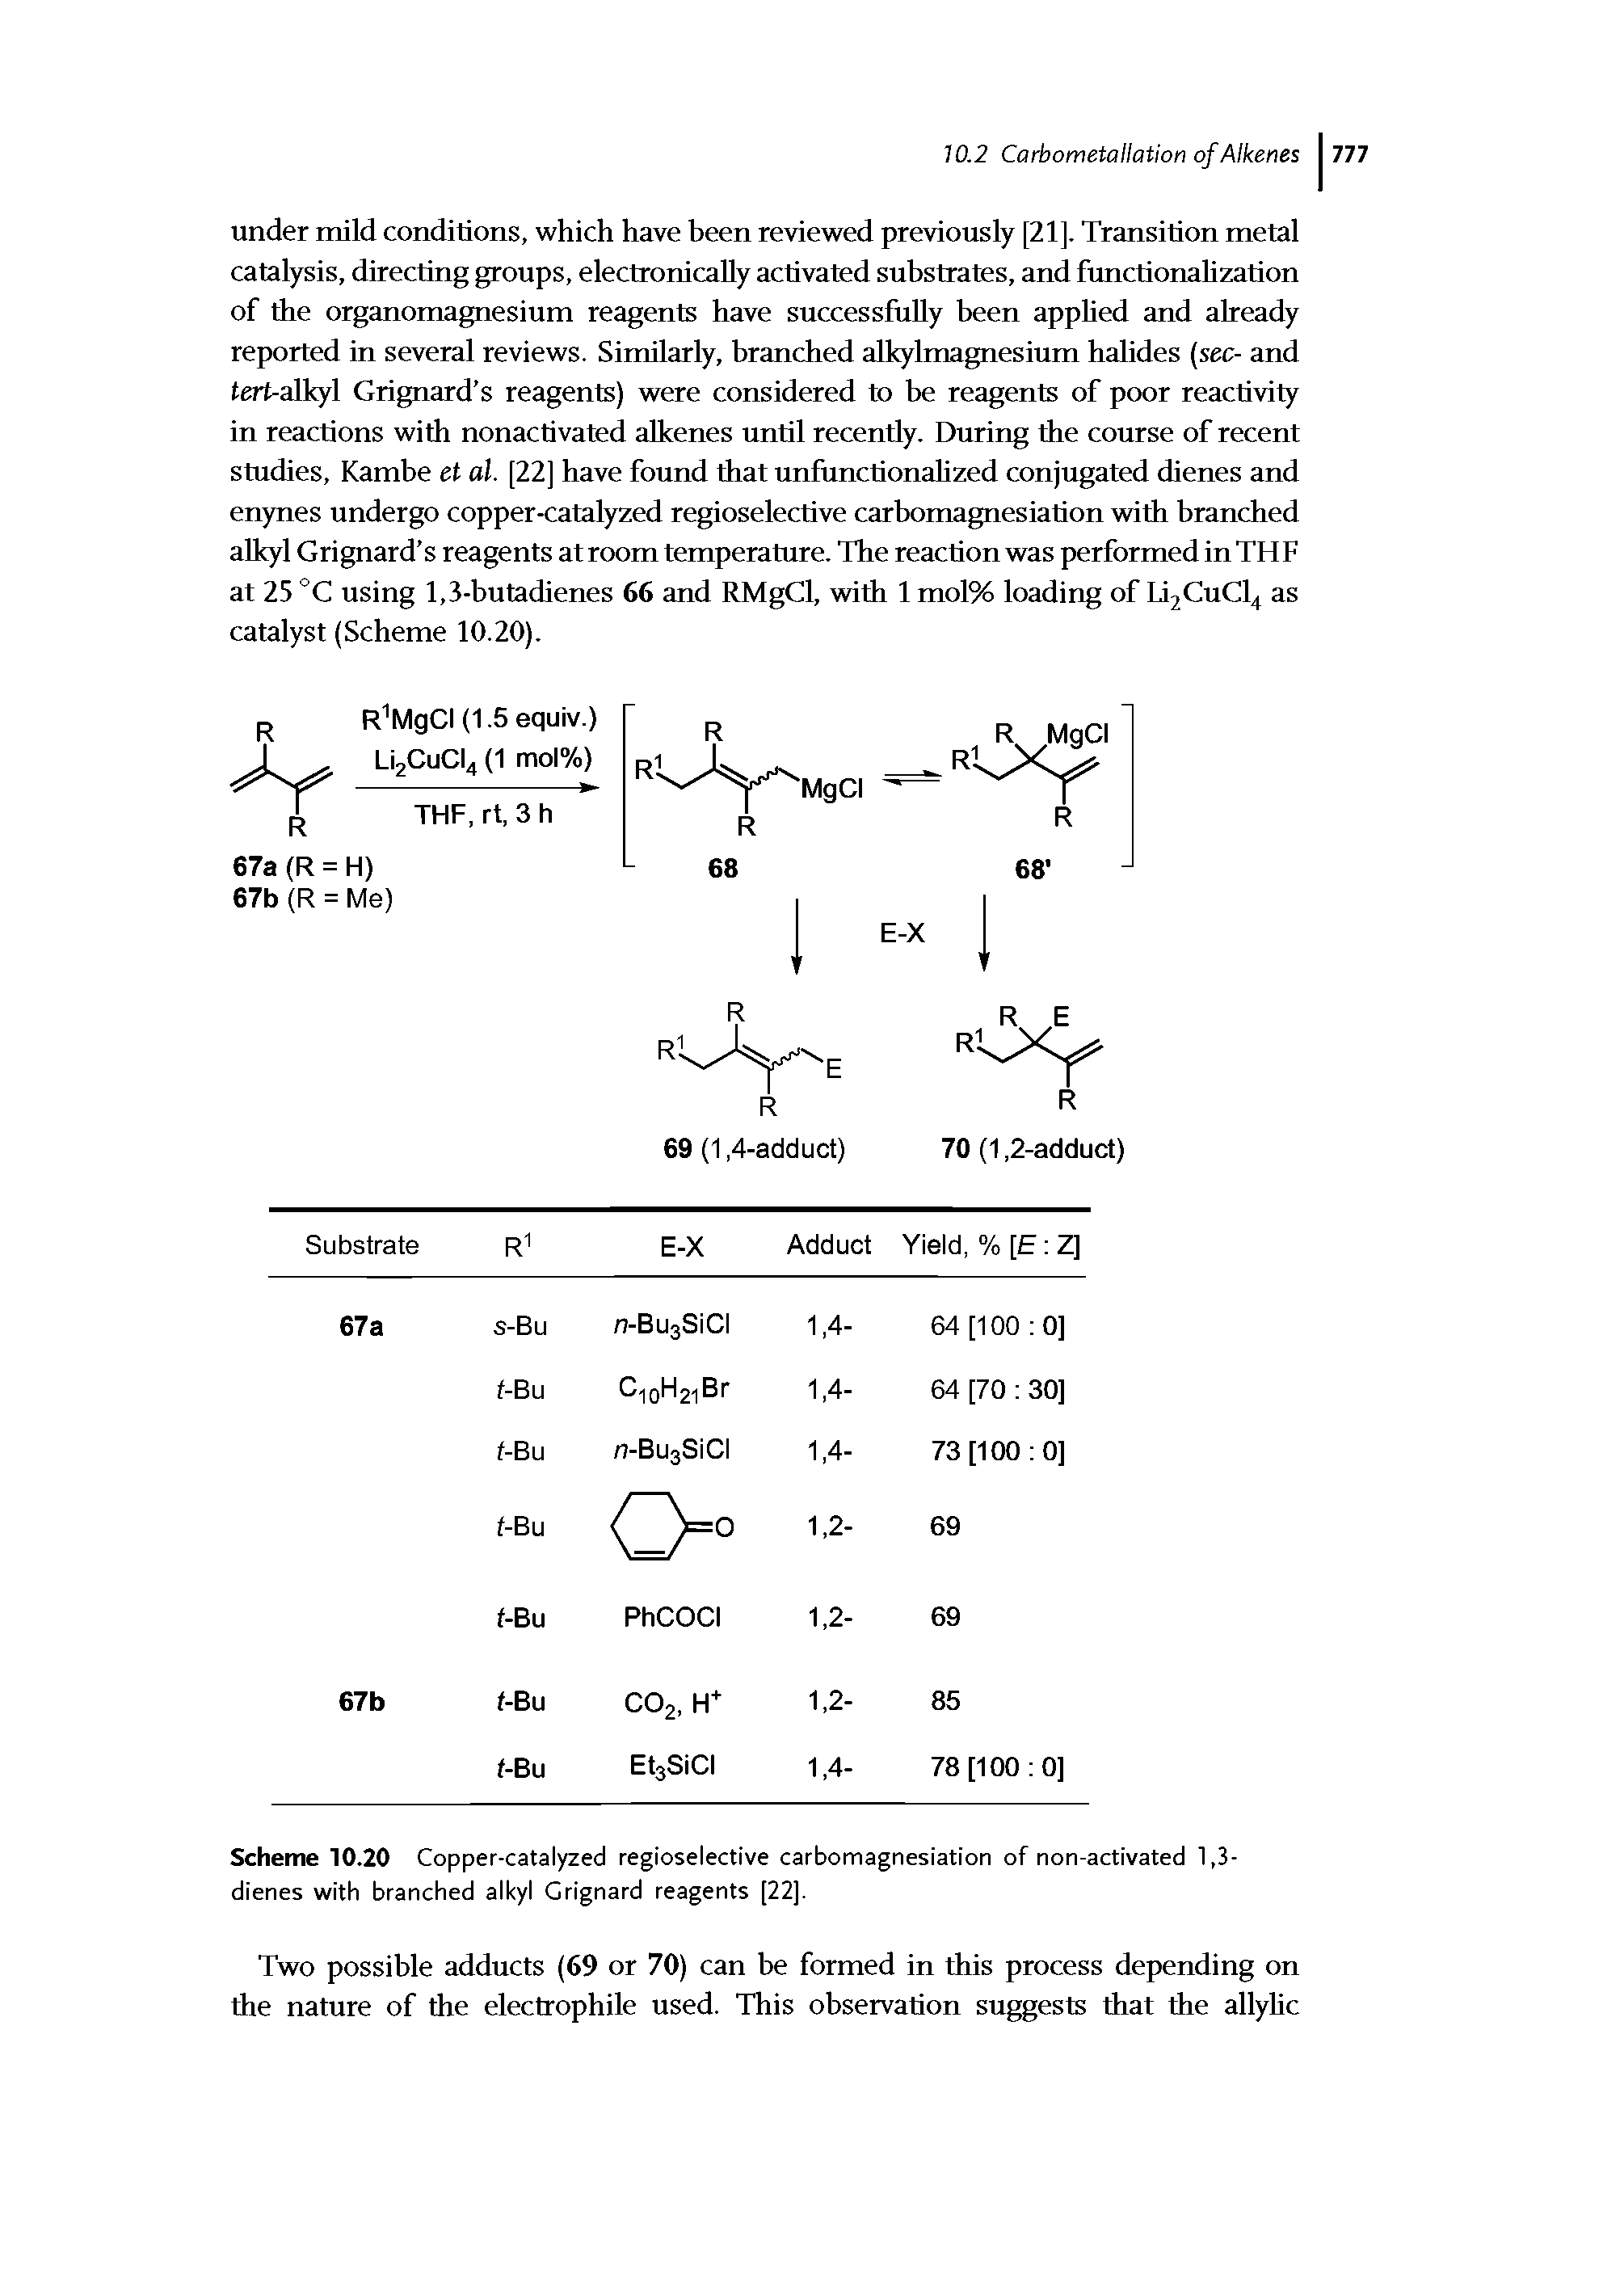 Scheme 10.20 Copper-catalyzed regioselective carbomagnesiation of non-activated 1,3-dienes with branched alkyl Grignard reagents [22].